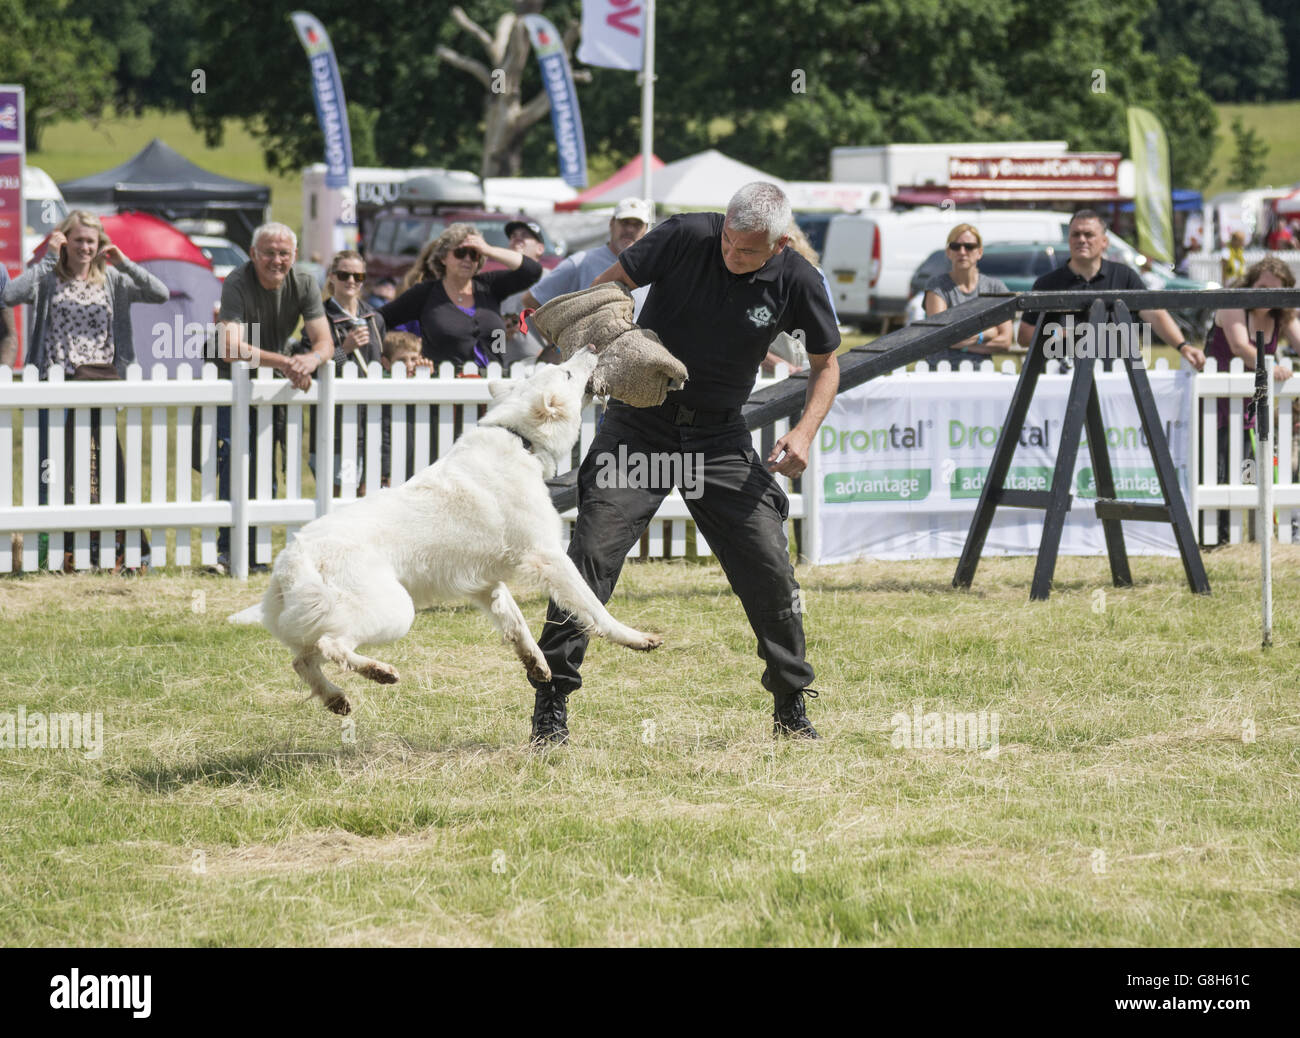 Attack dog demonstration at Dogfest 2016 windsor park Stock Photo